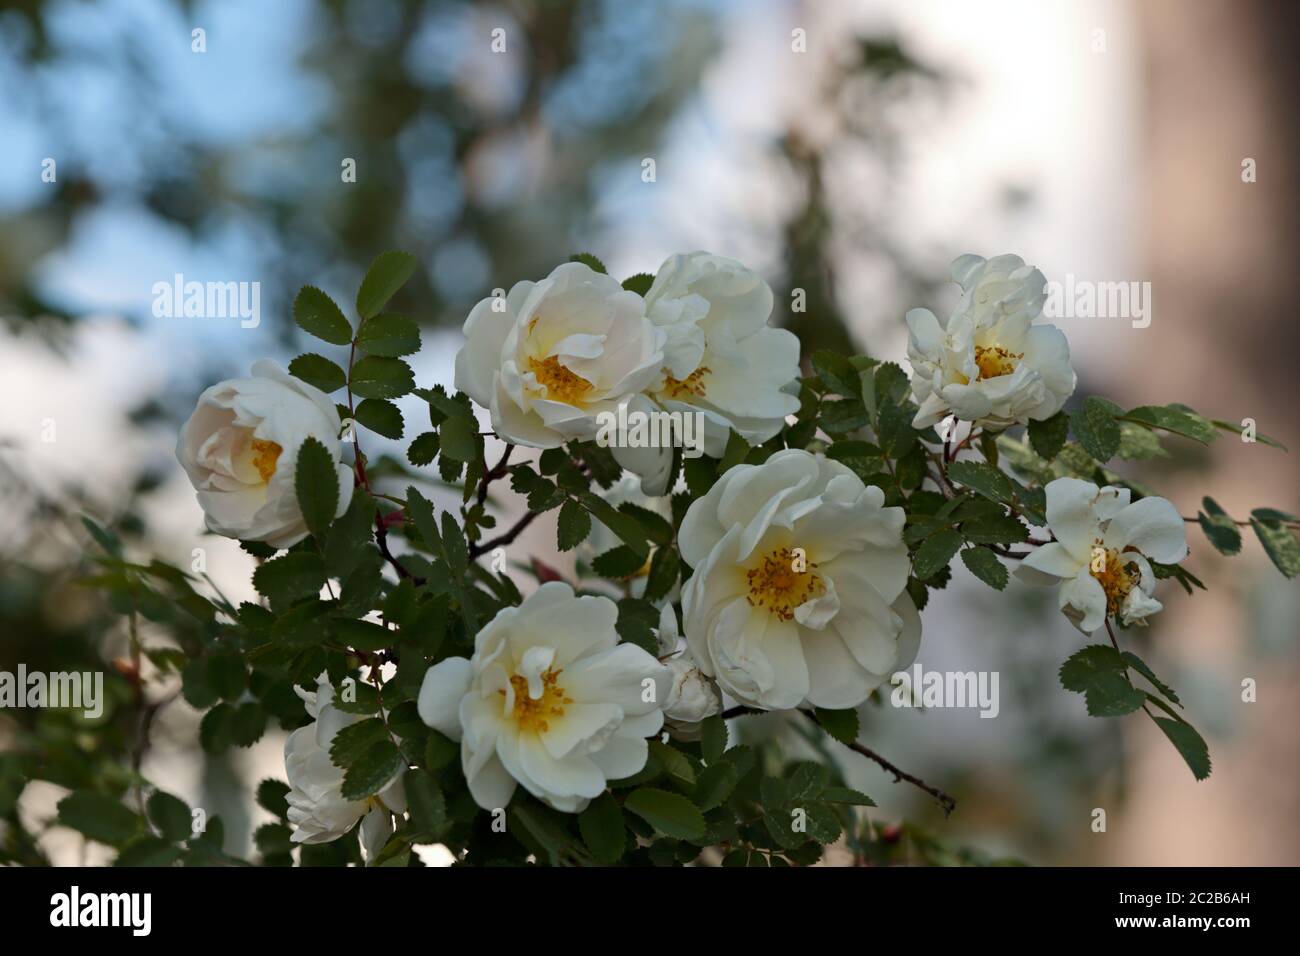 White fragrant flowers of rosa spinosissima (Rosa pimpinellifolia) blooming in summer garden Stock Photo